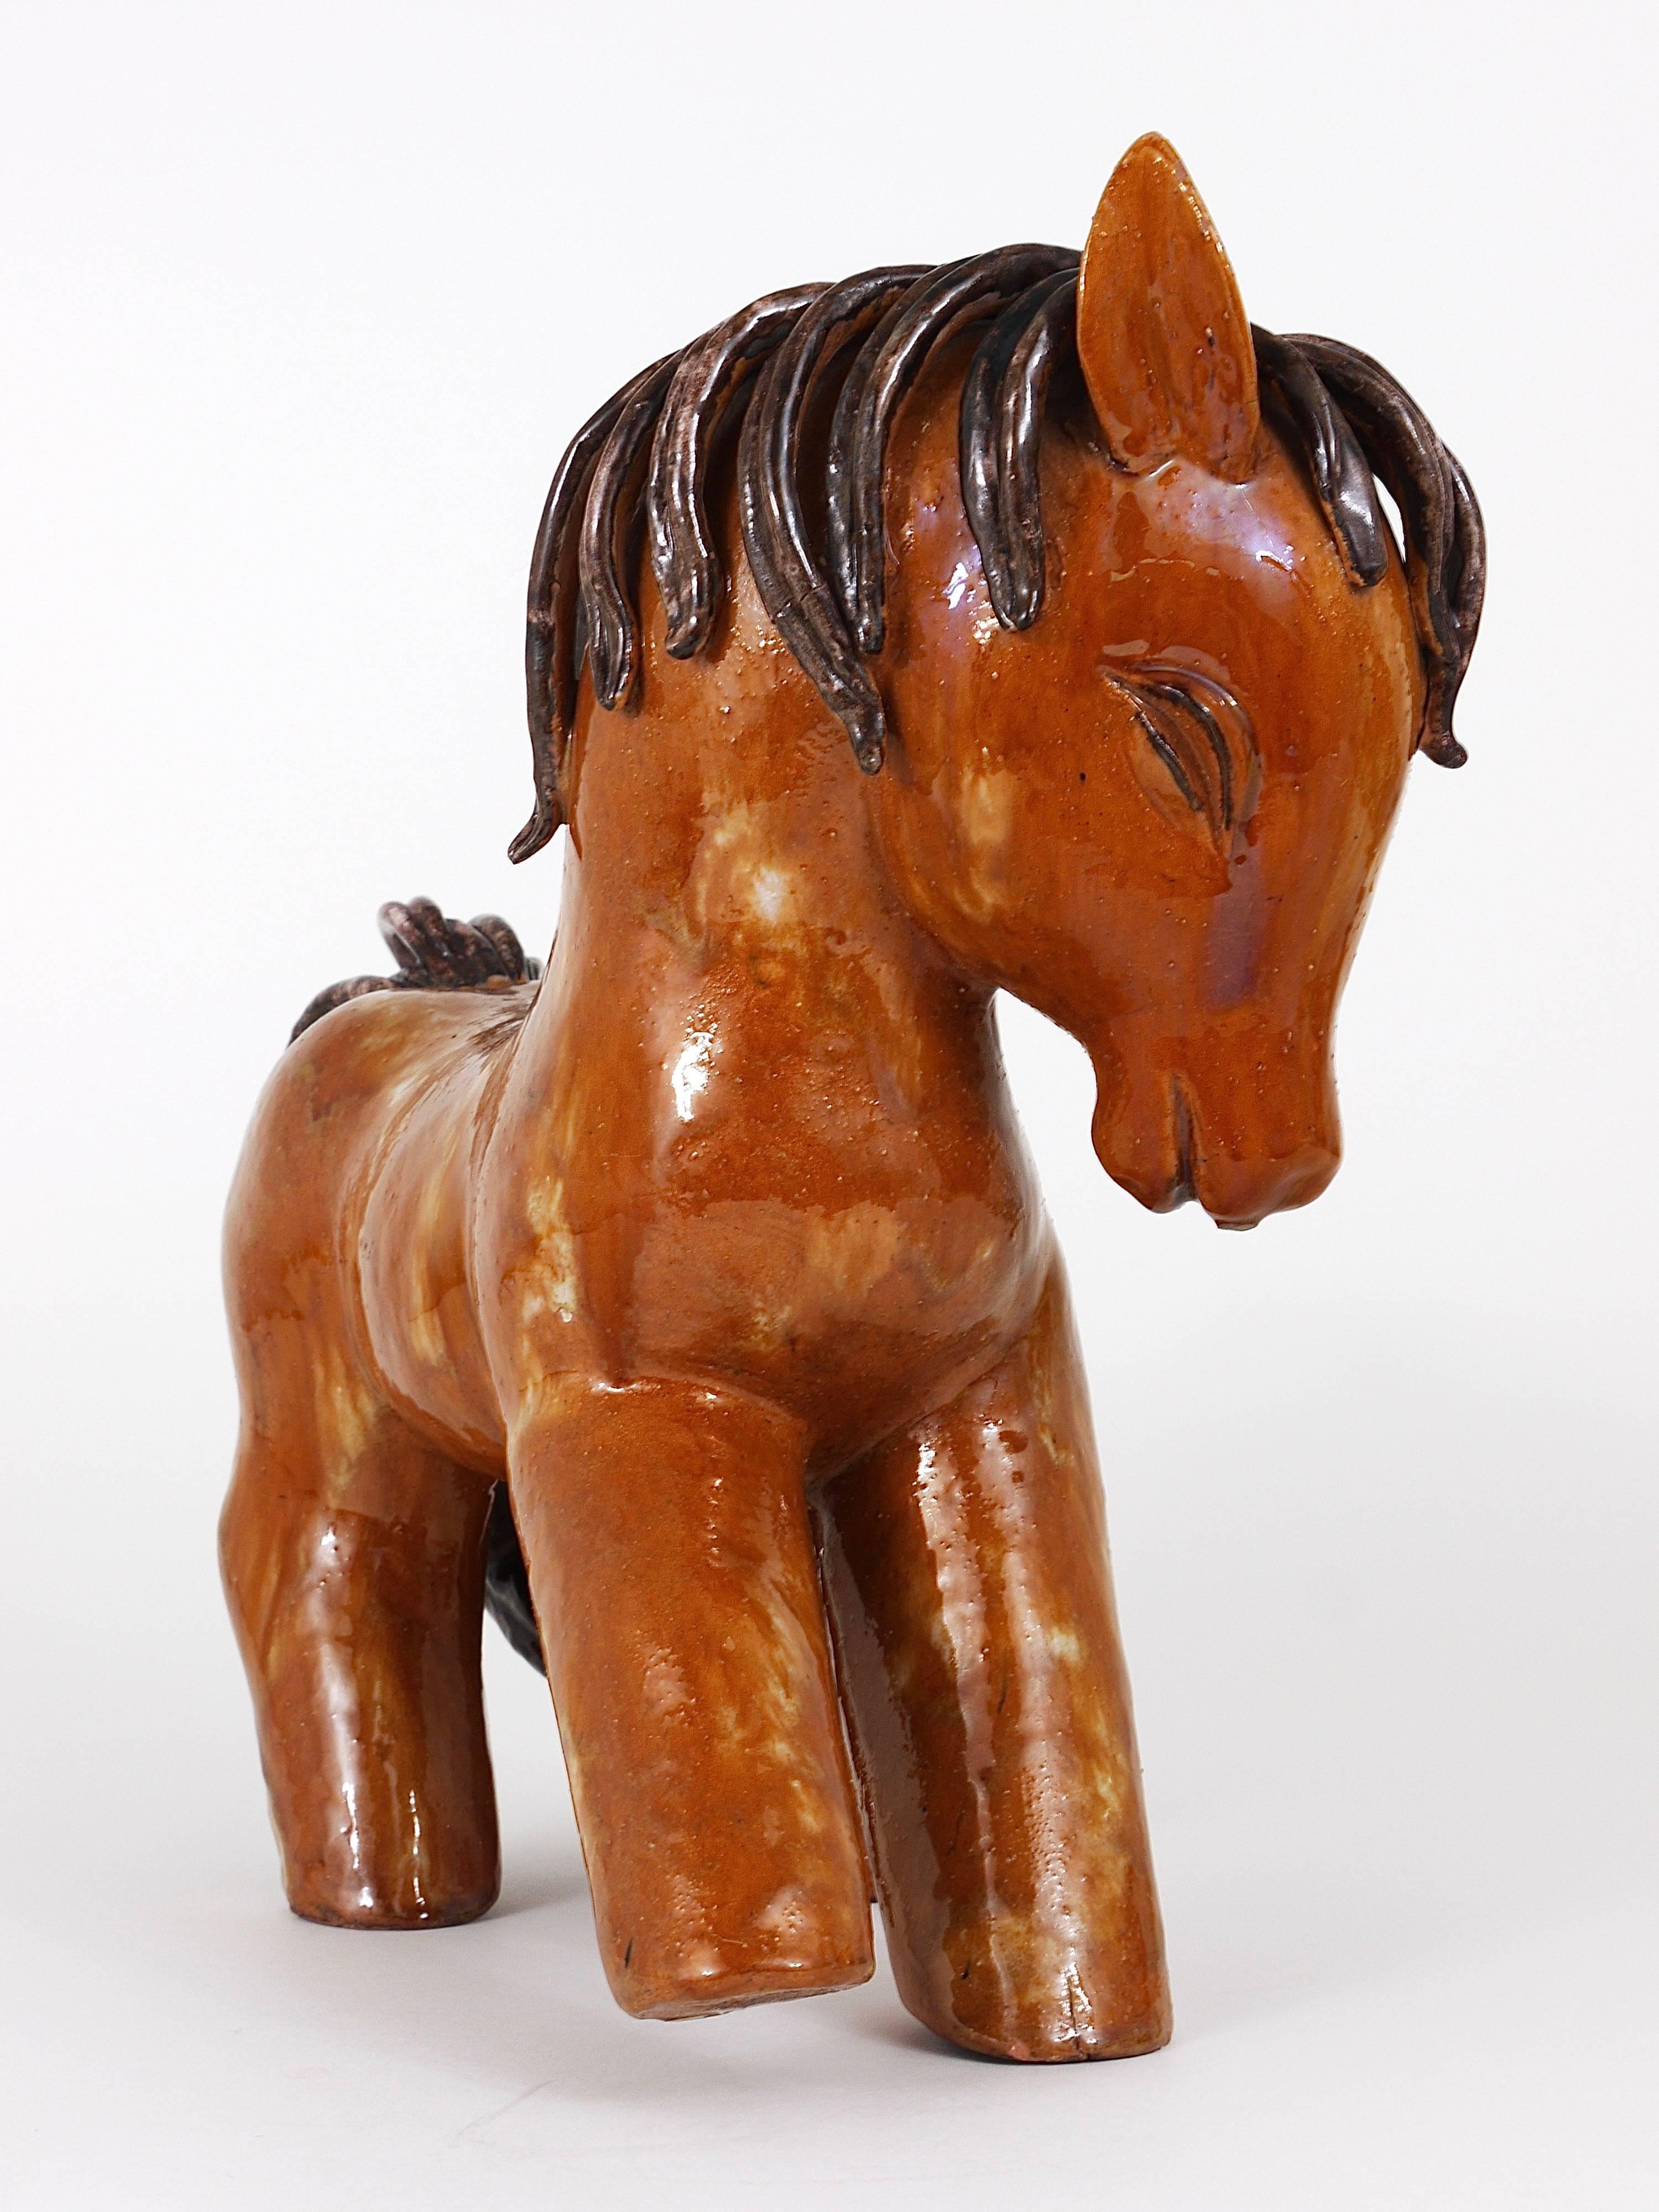 A lovely and huge handmade figurine / statue displaying a horse dated from 1947 to 1951. Designed by Walter Bosse, made of ceramic / terracotta in Kufstein/Tyrol, Austria. A charming piece in very good condition. We never had a Walter Bosse